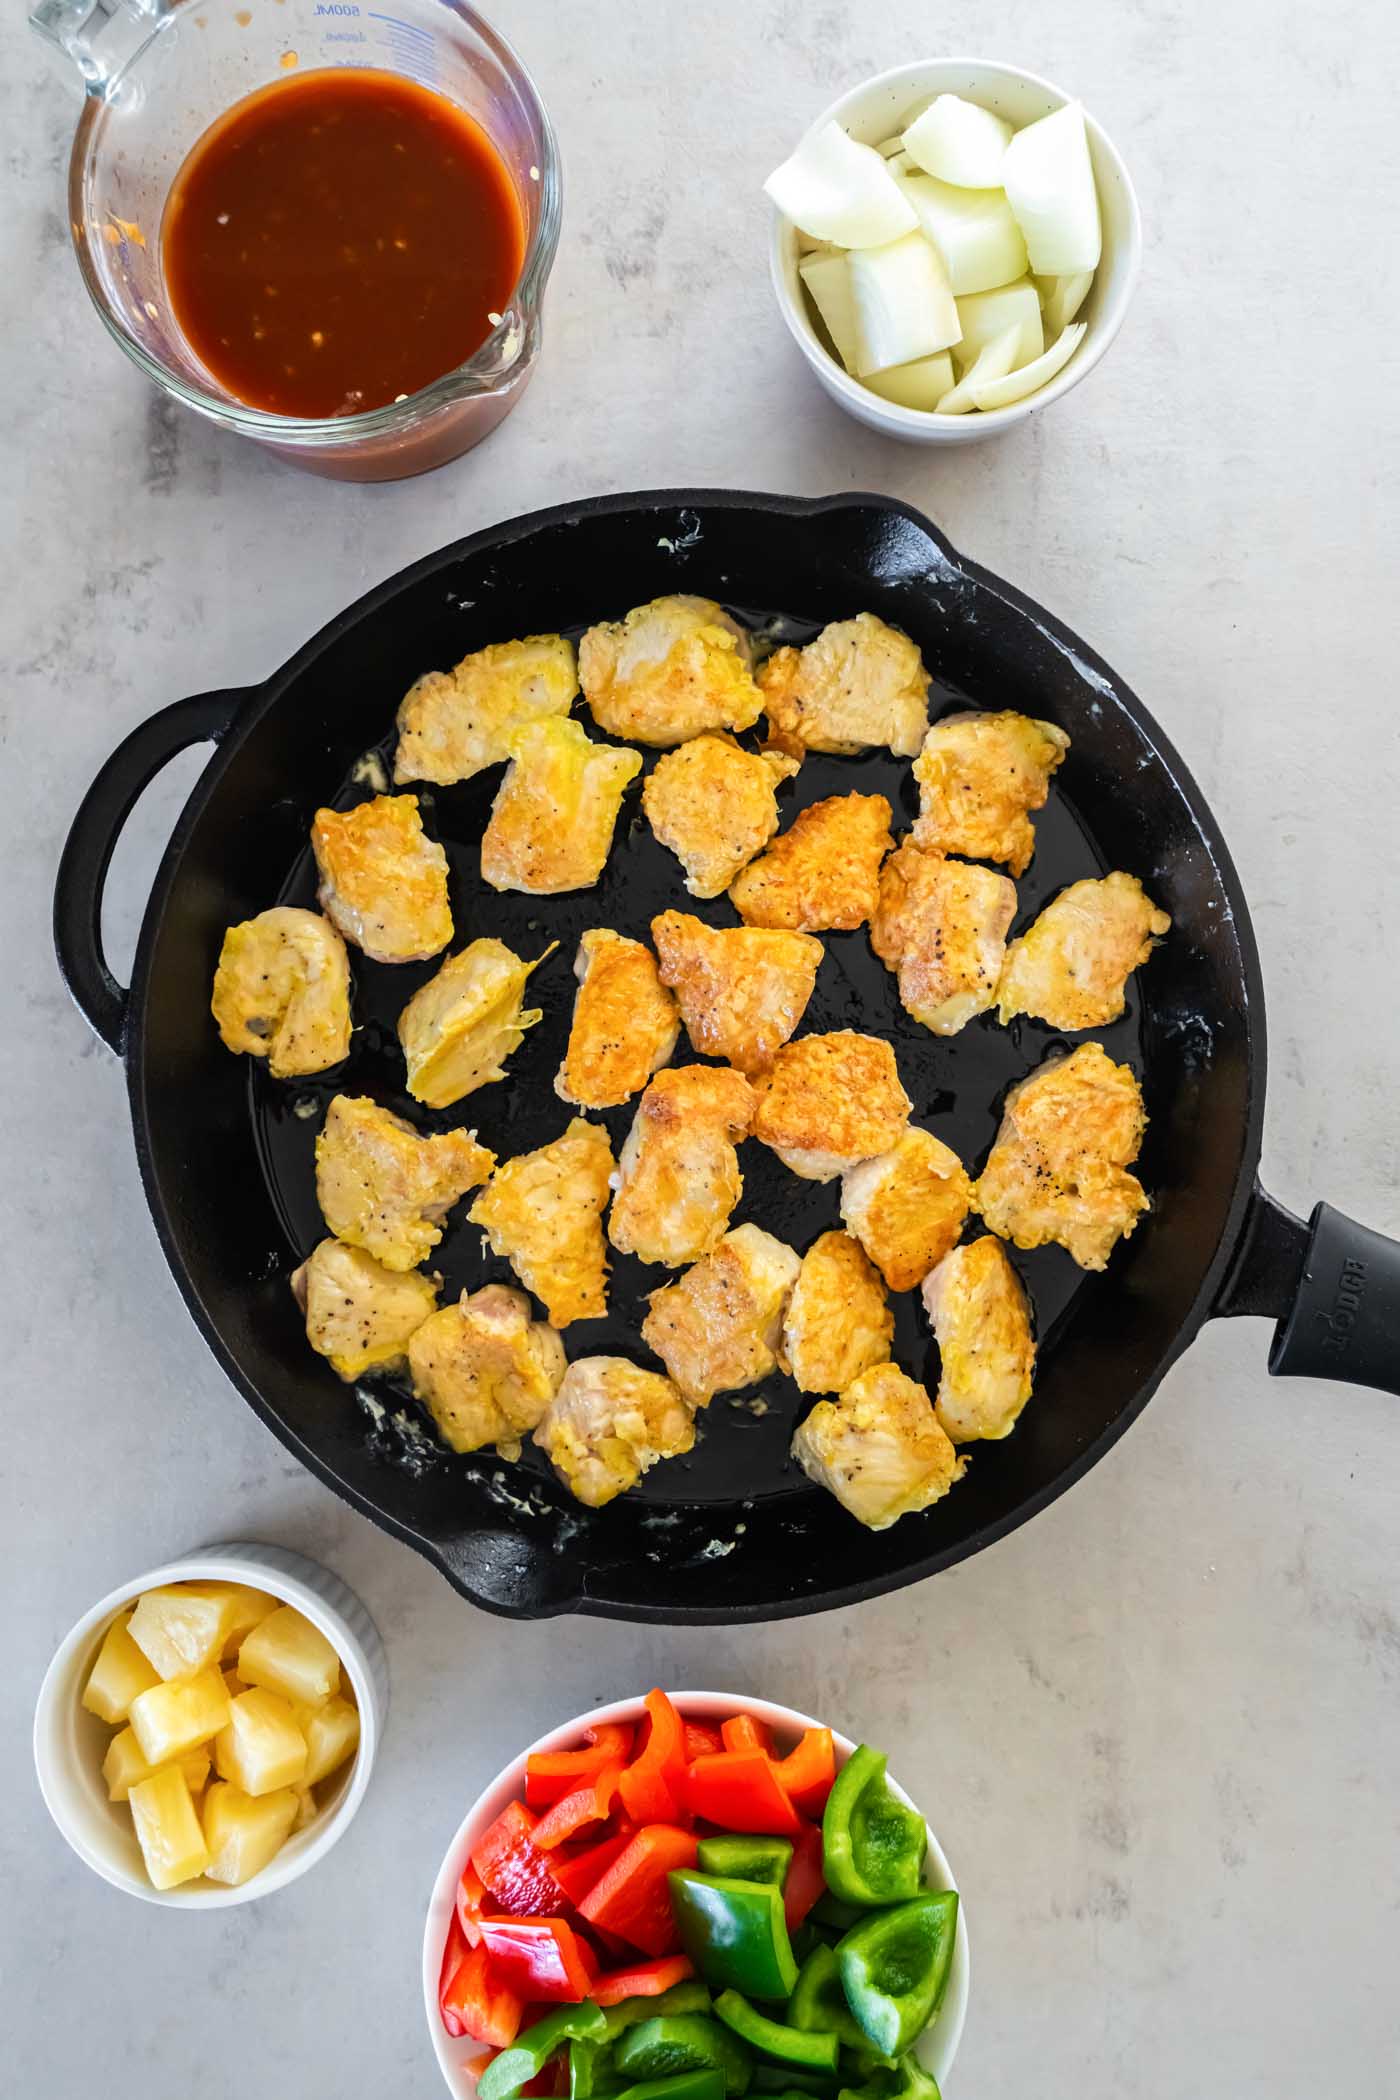 Browning chicken pieces in skillet.